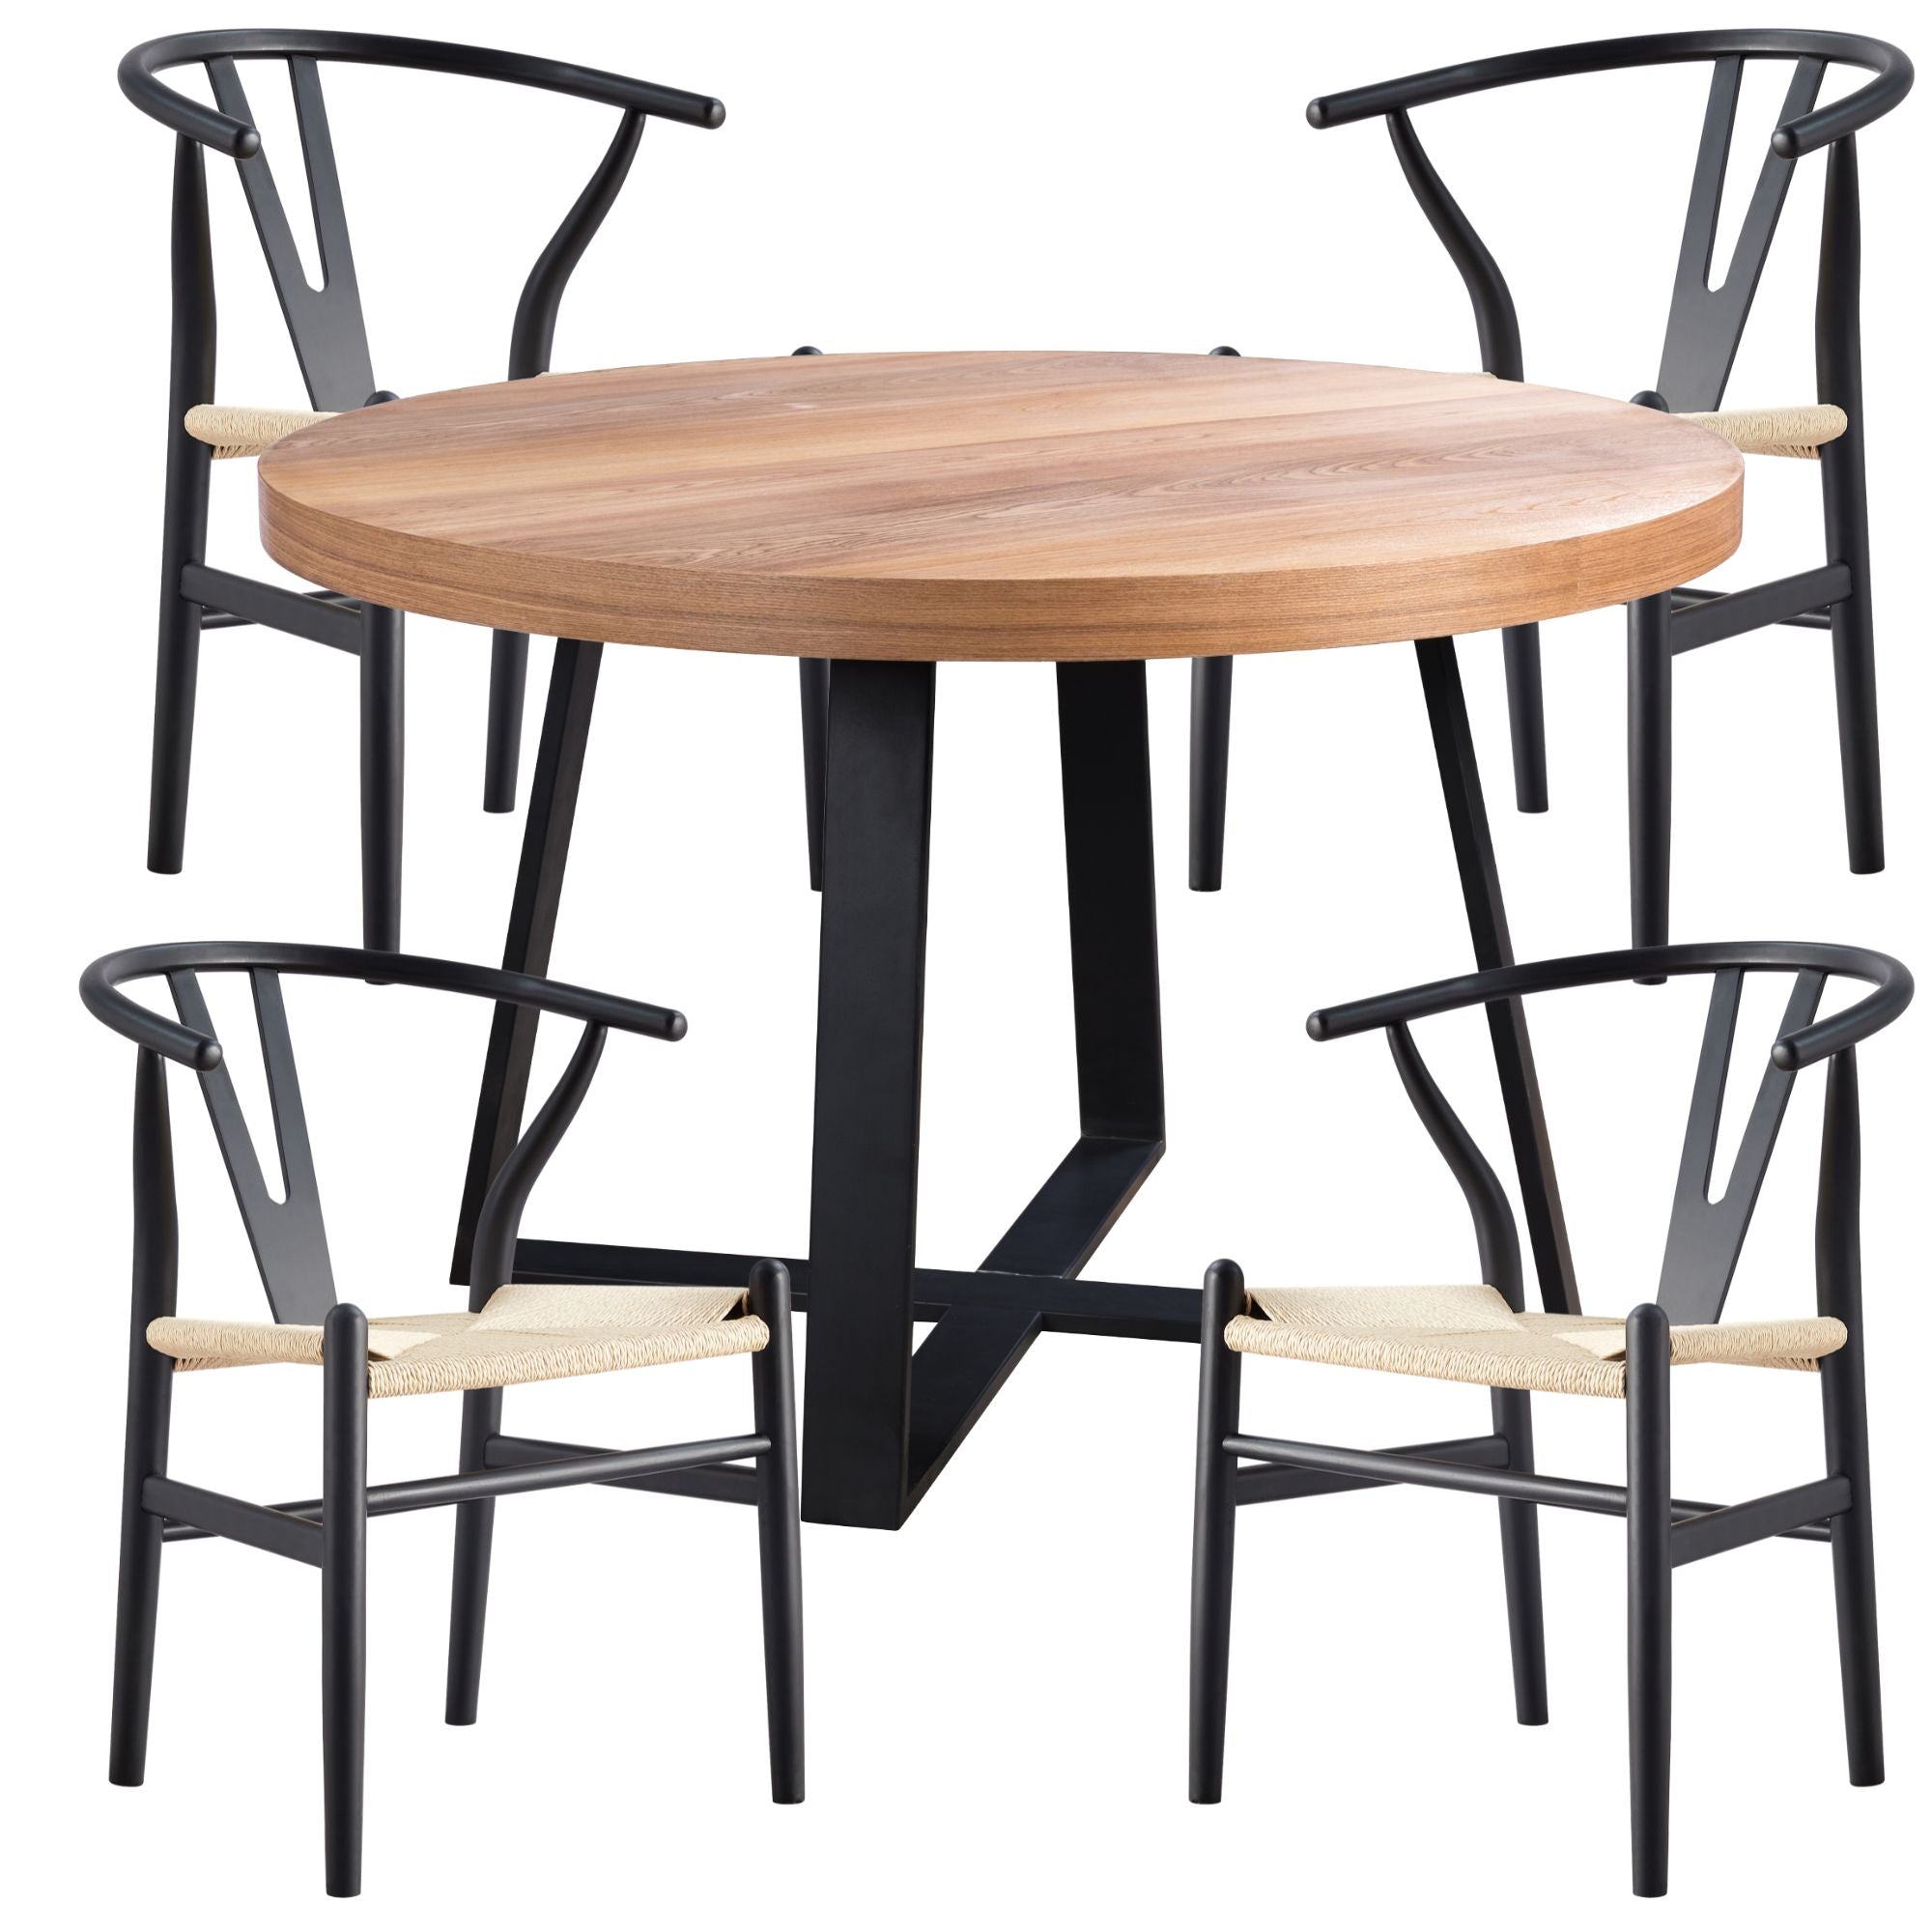 5pc 120cm Round Dining Table Set 4 Wishbone Chair Elm Timber Wood